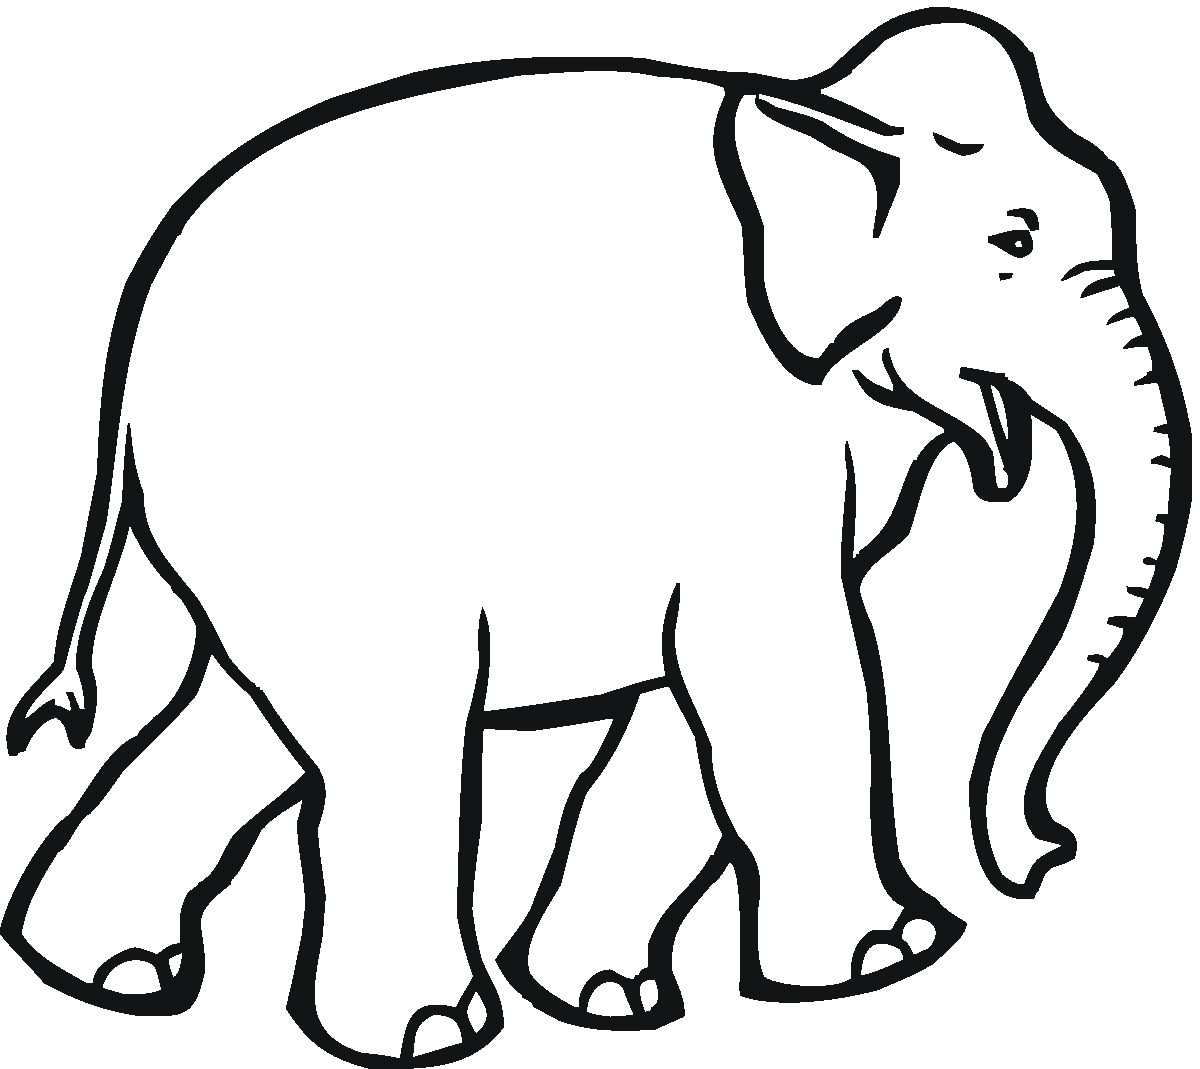 elephant pictures to color black beauty 18 elephant coloring pages free printables to color elephant pictures 